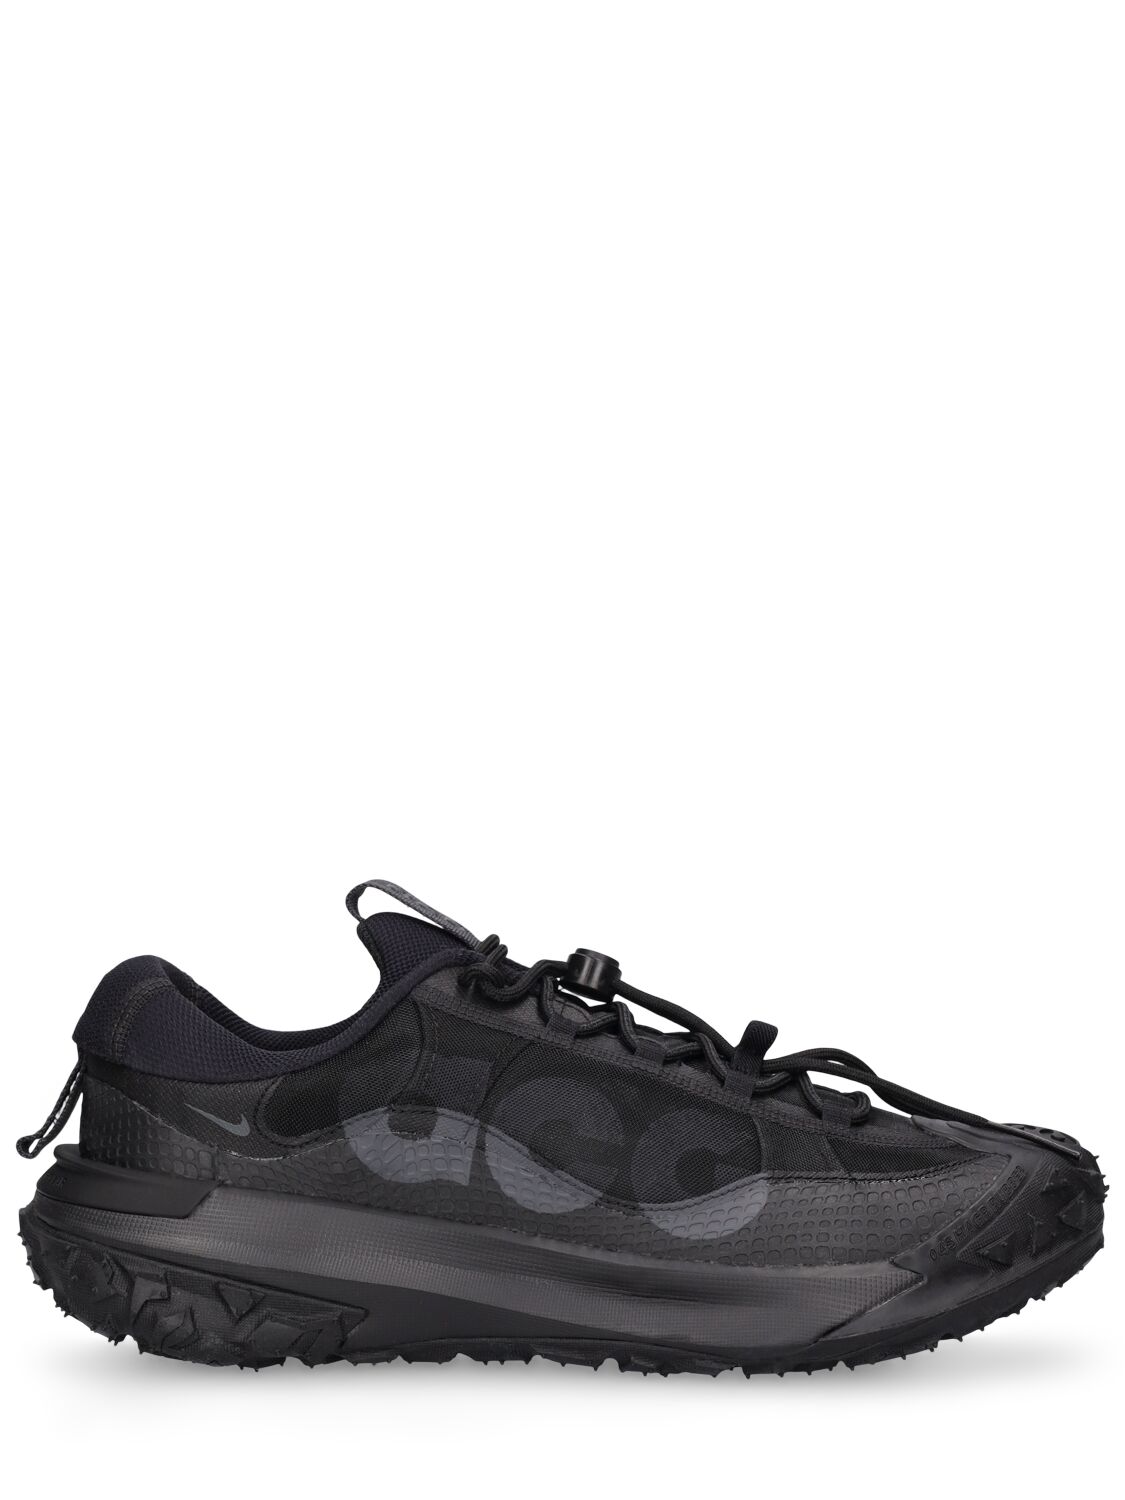 Image of Acg Mountain Fly 2 Low Sneakers